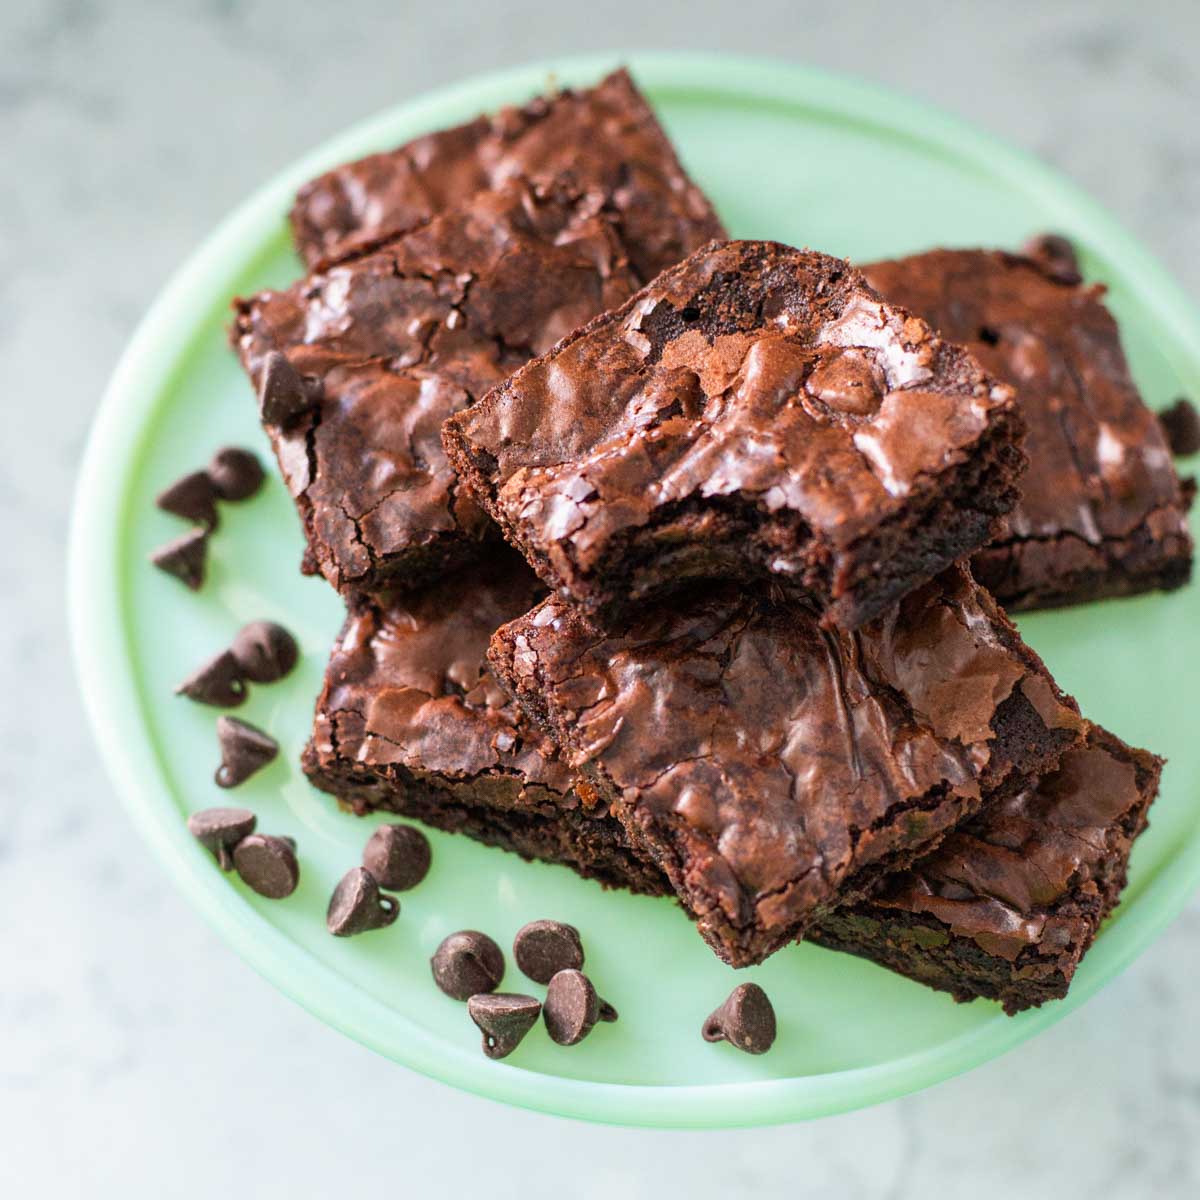 A round platter of a pile of chocolate brownies with a bite taken out of the one on top and a sprinkle of chocolate chips to the side.